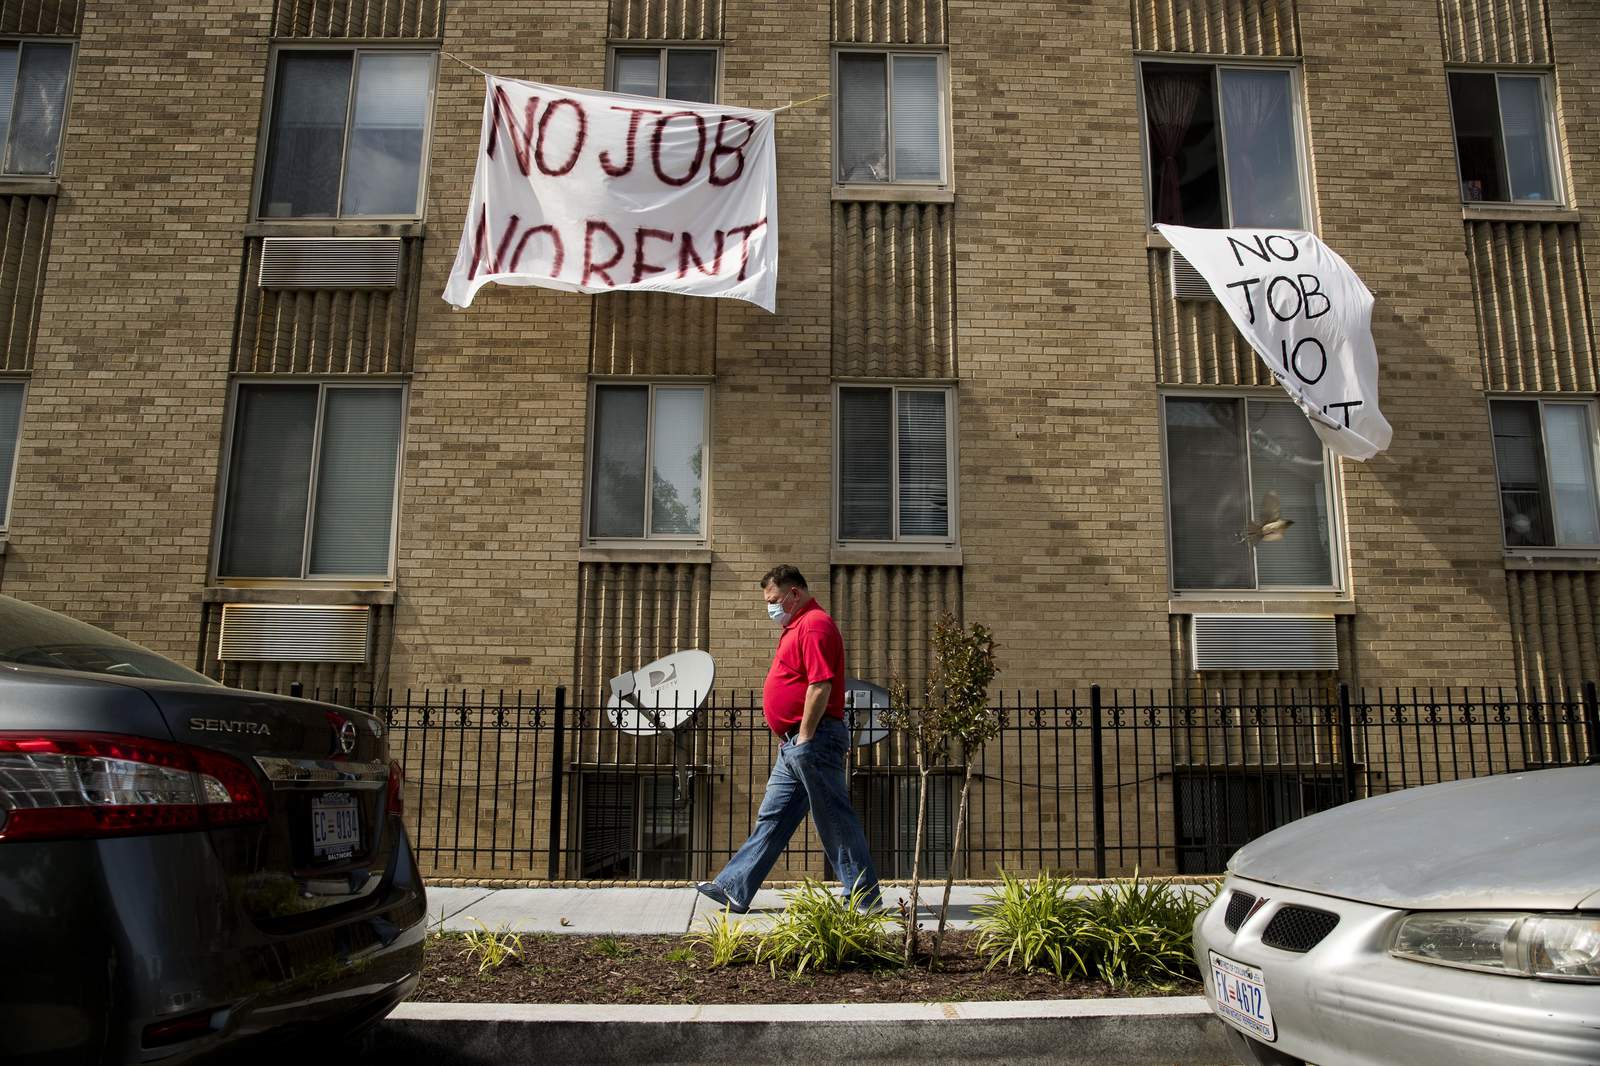 Tenants behind on rent in pandemic face harassment, eviction